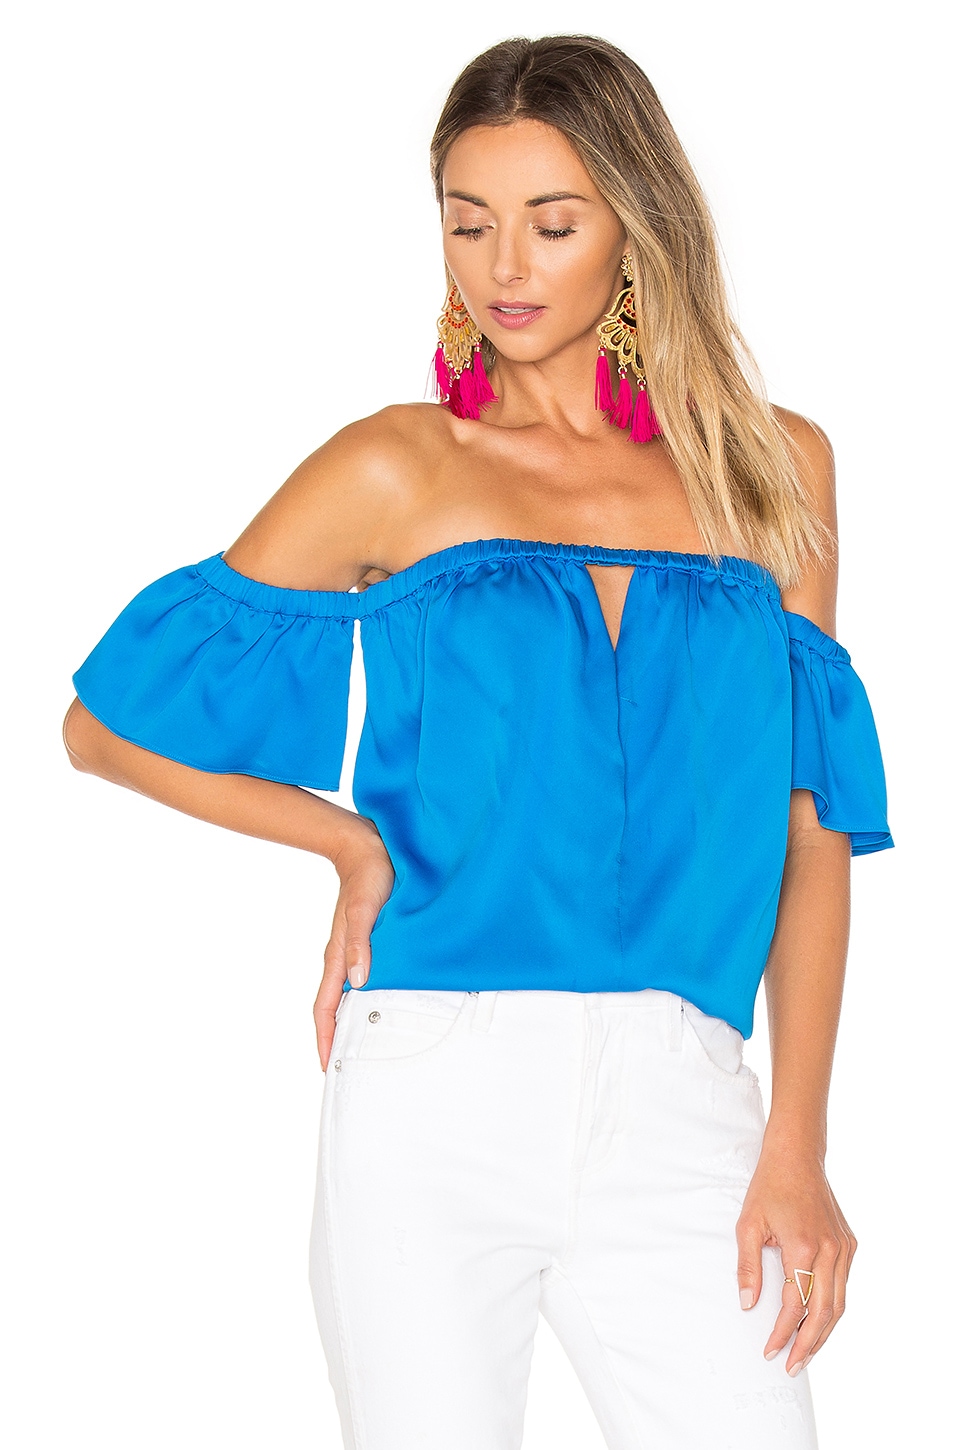 MILLY Blaire Top in Lapis | REVOLVE